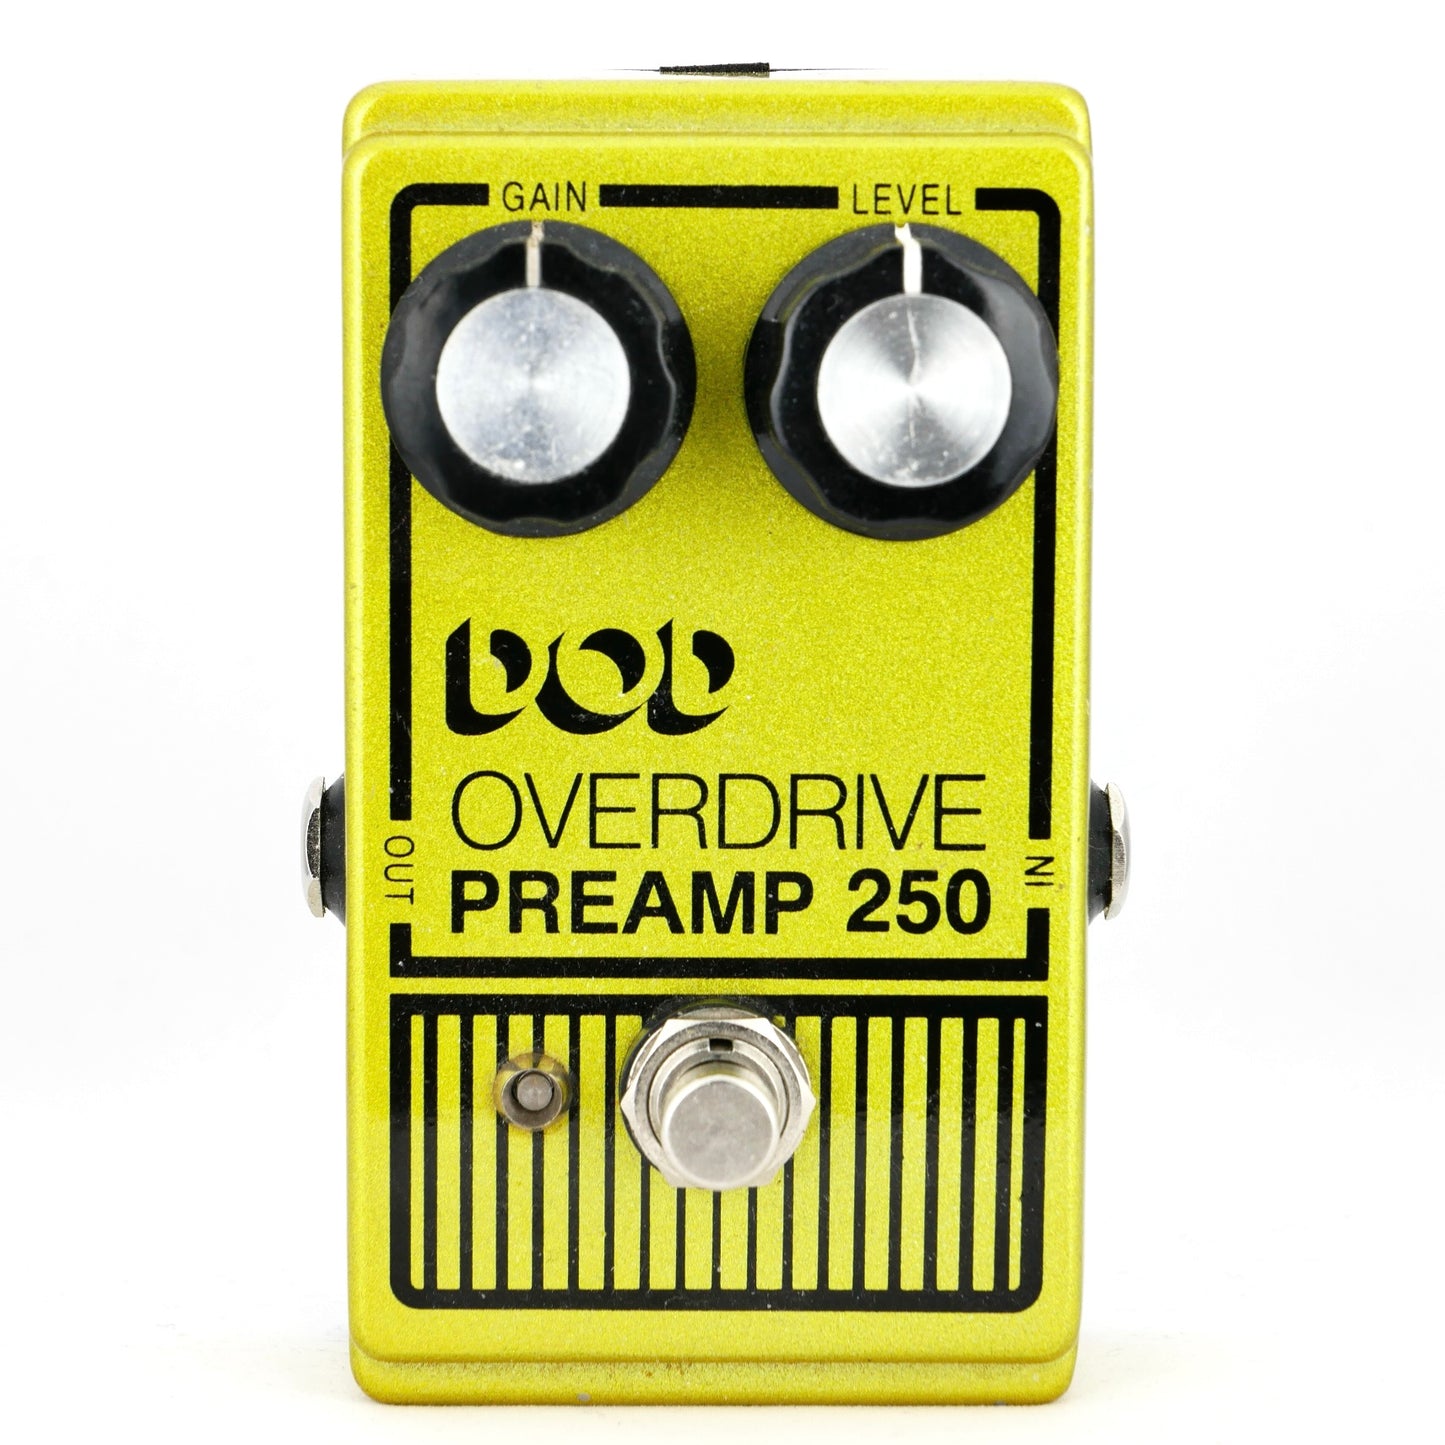 DOD Overdrive Preamp 250 Reissue - Very Good